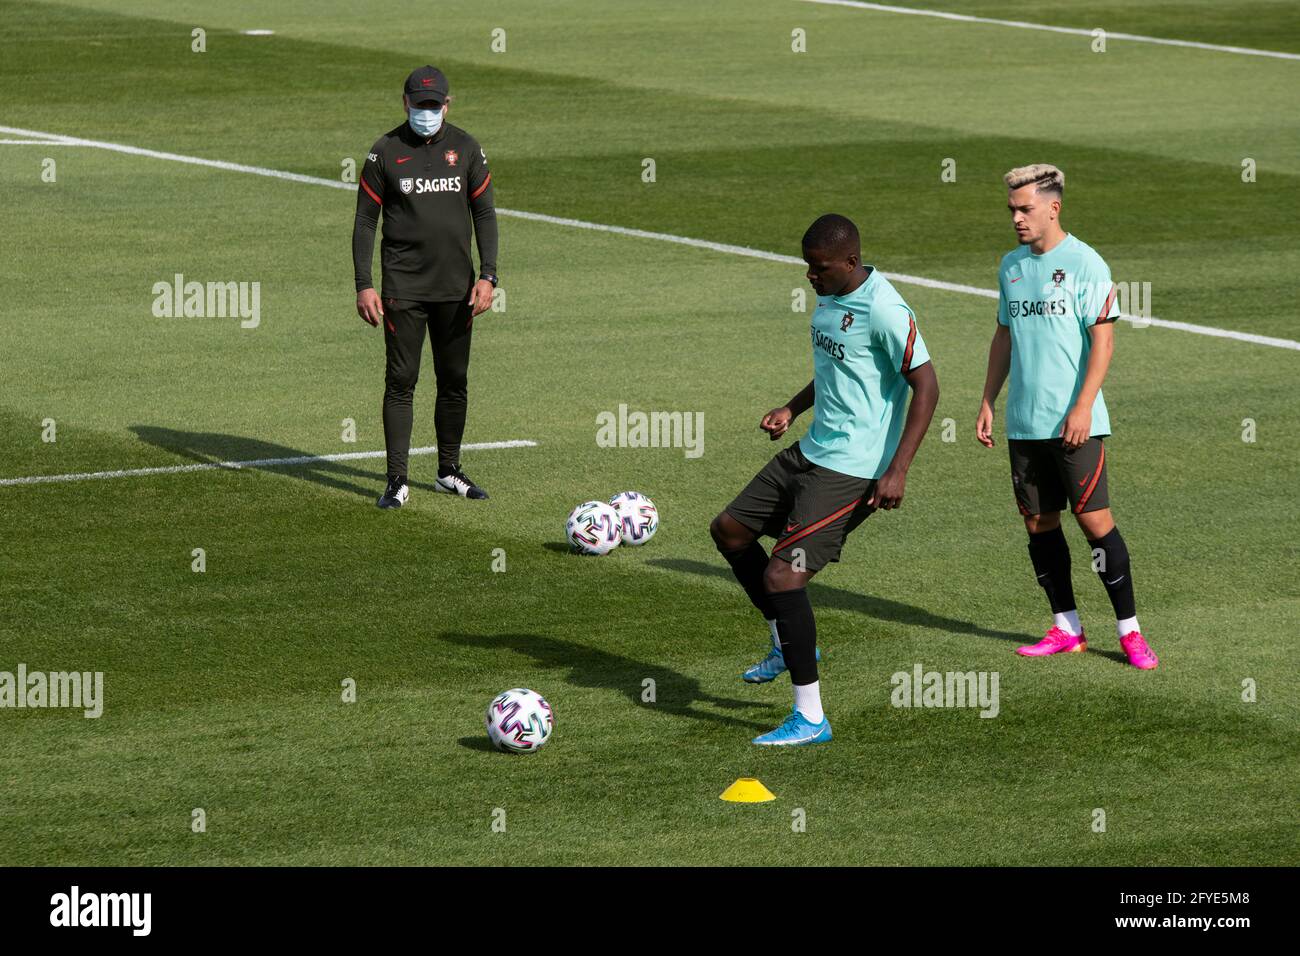 Oeiras, Portugal. 27th May, 2021. William Carvalho (C) and Pedro Goncalves (R) are seen in action during the training session at Cidade do Futebol training ground in Oeiras.Portugal football team trains for the first time before competing in the European football championship - EURO 2020 - scheduled to start on June 11th. Credit: SOPA Images Limited/Alamy Live News Stock Photo